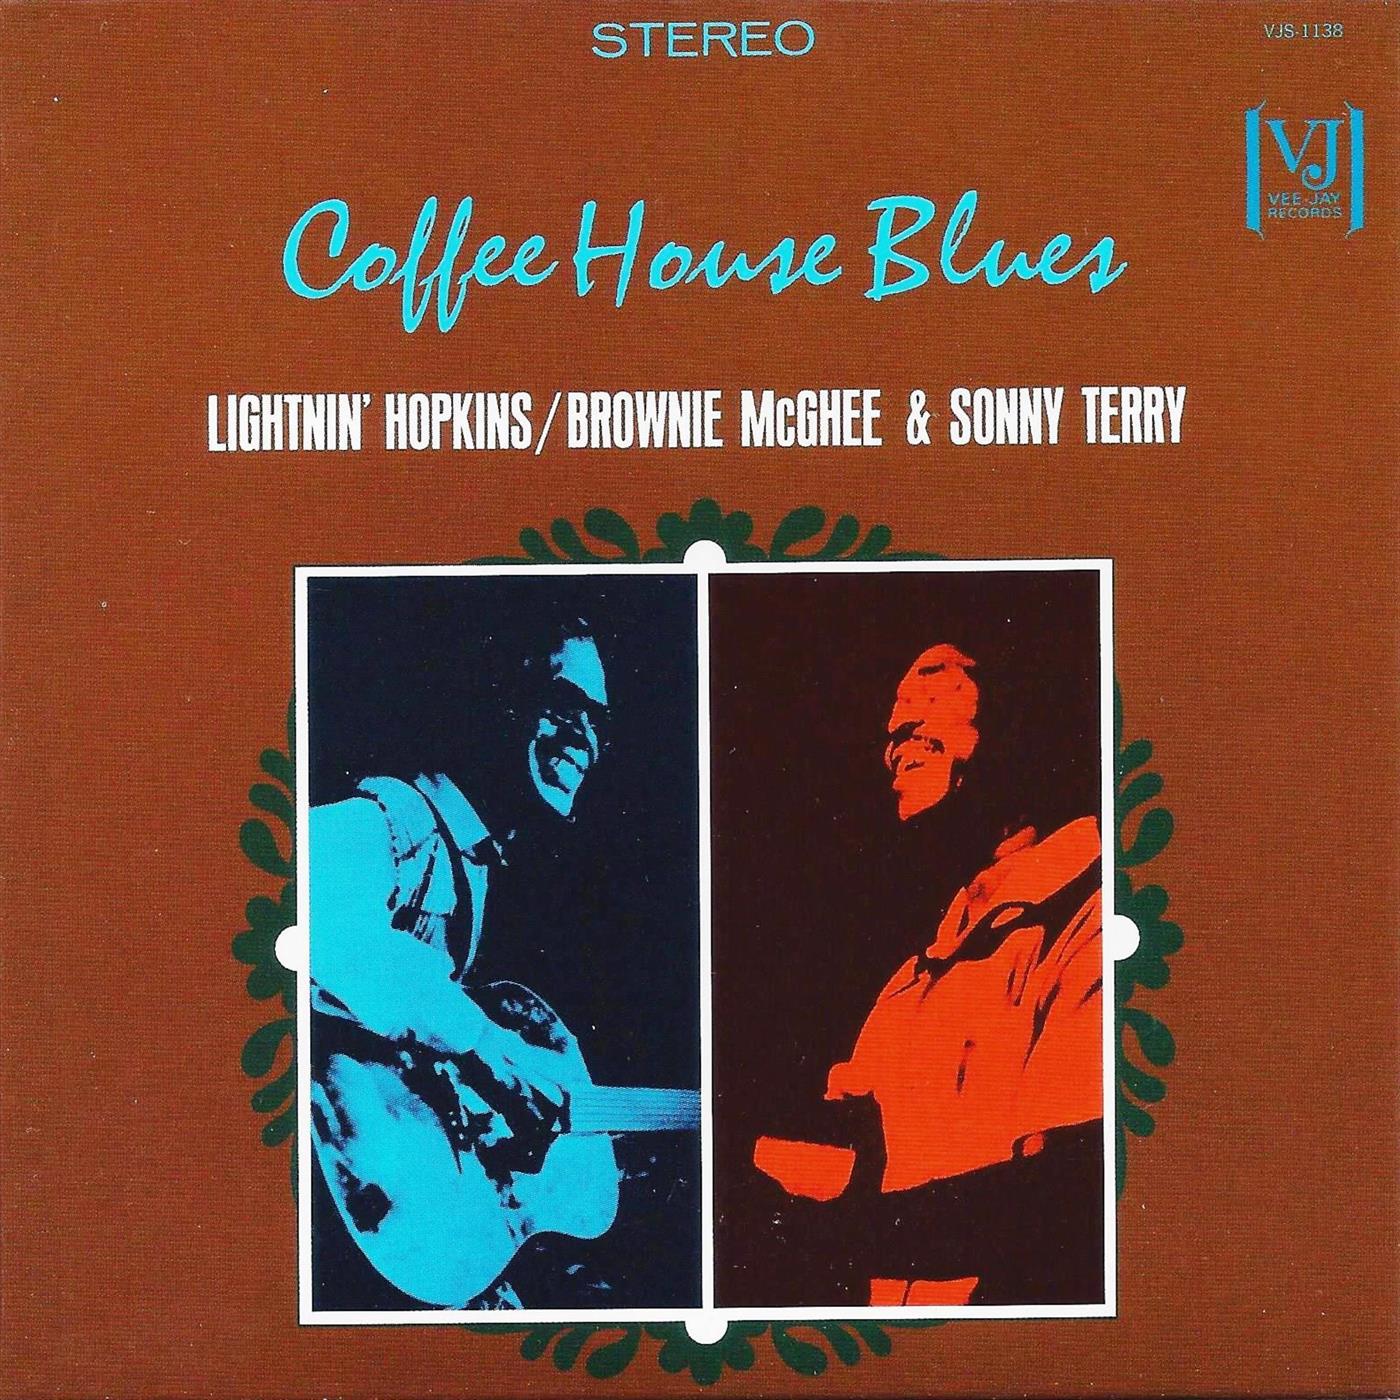 Blowin' The Fuses / Brownie McGhee & Sonny Terry